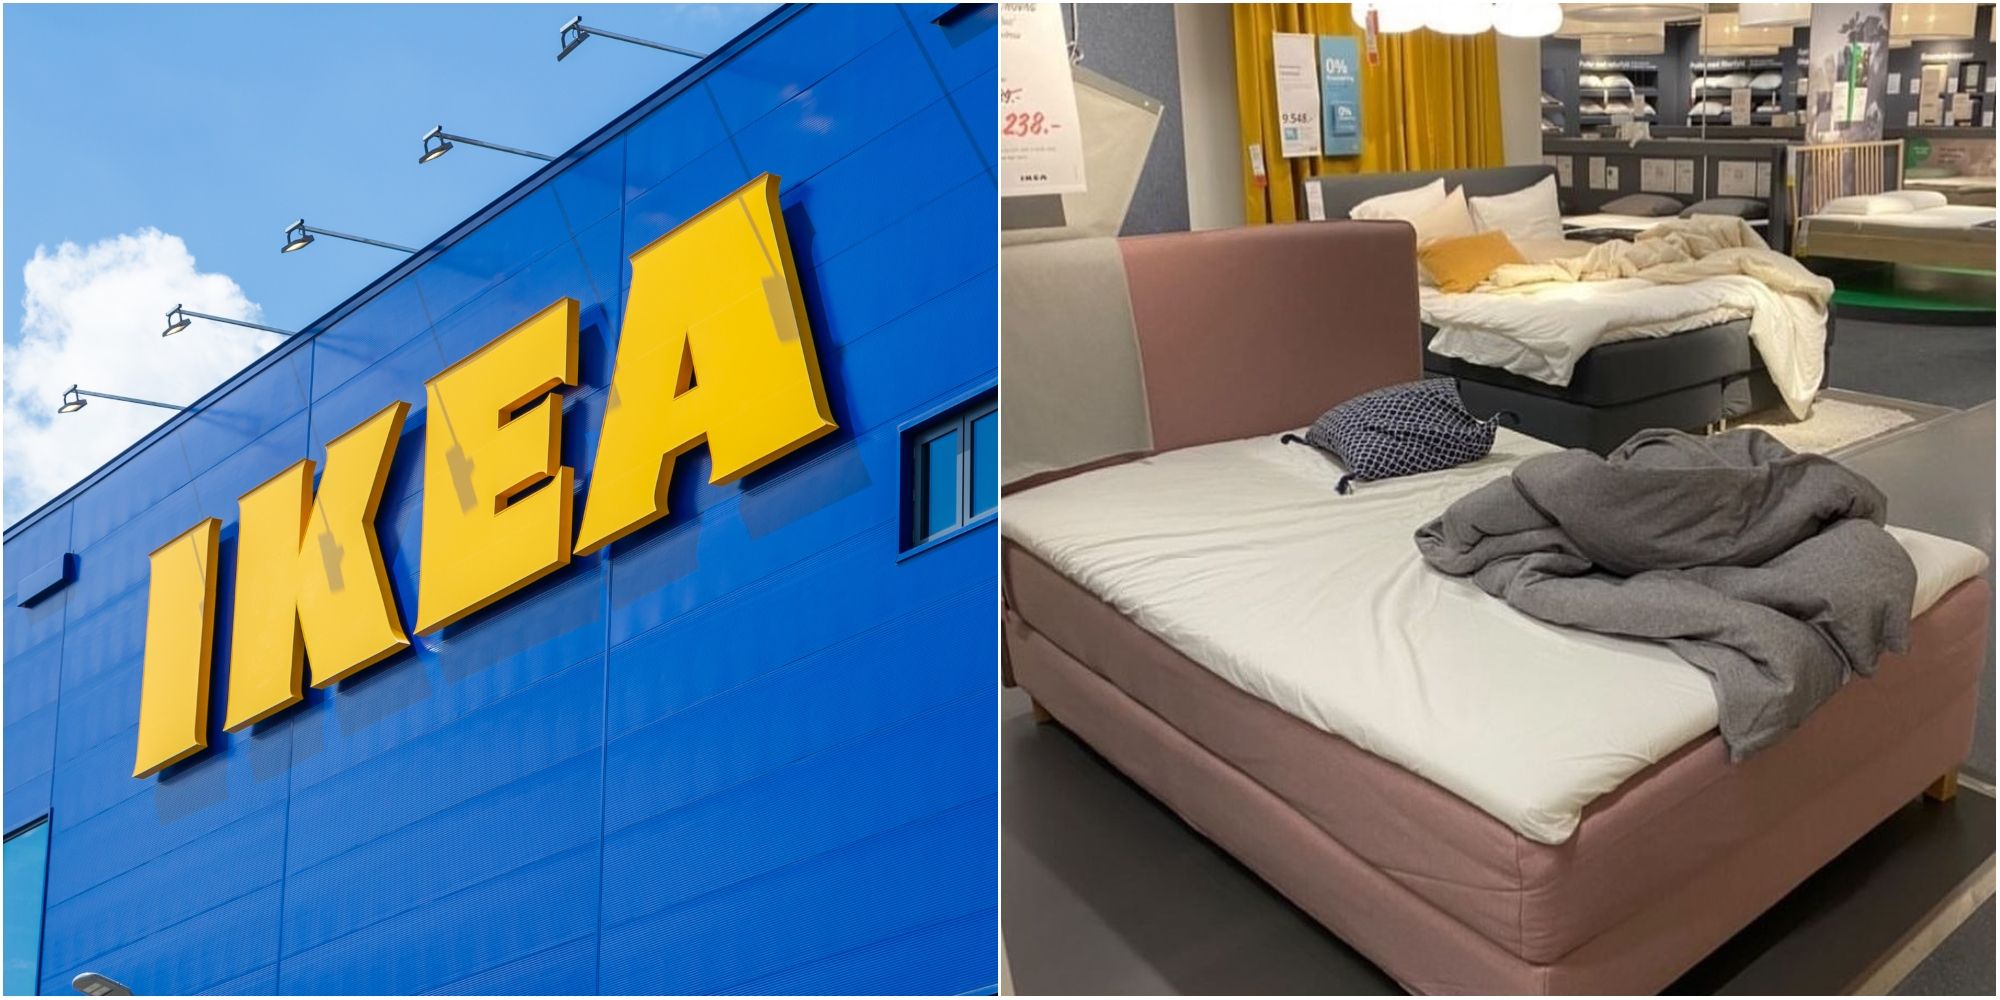 IKEA Customers Spend Night In After In